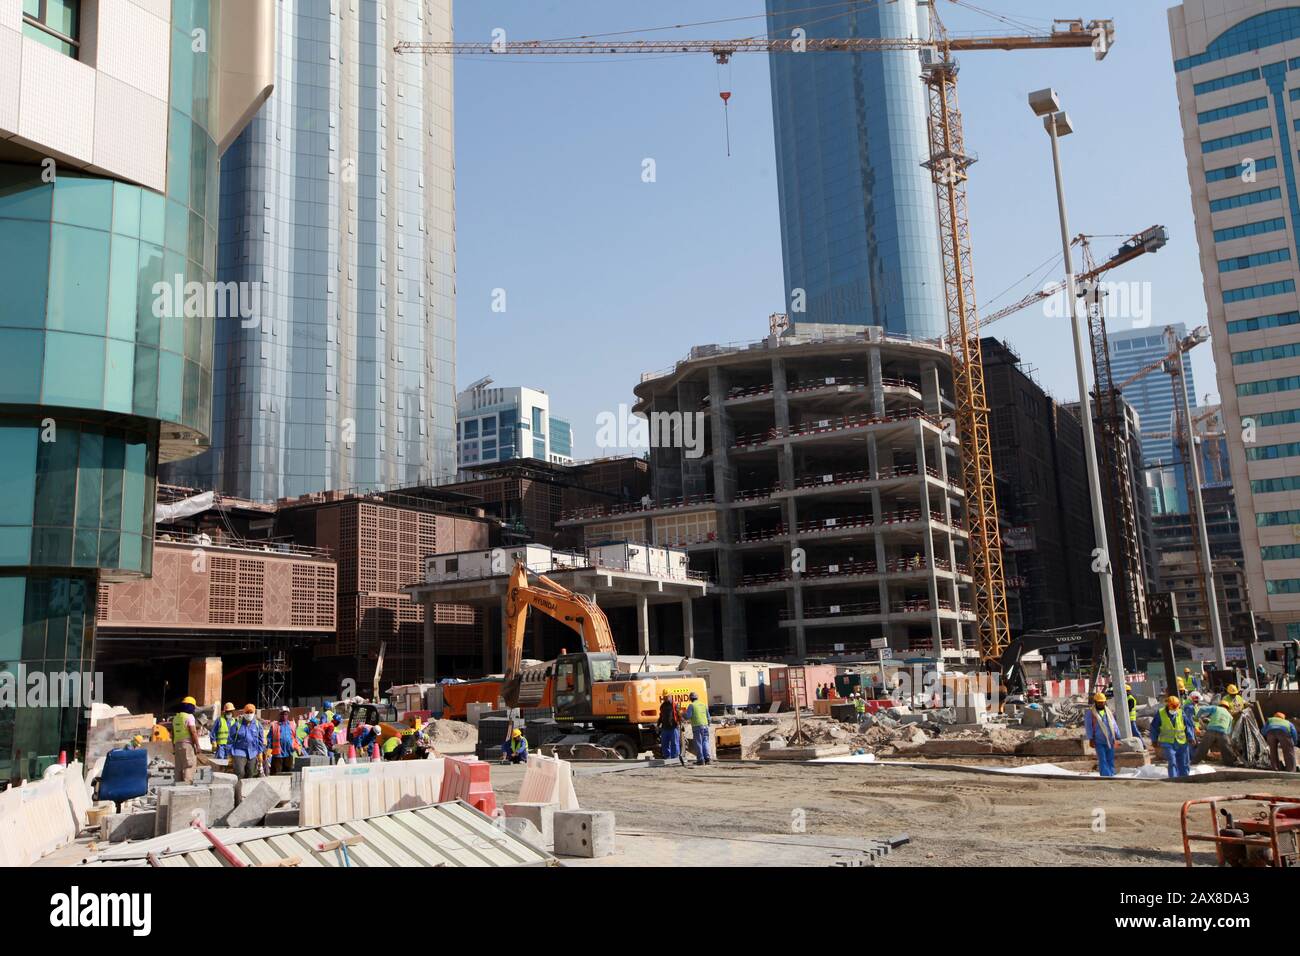 The Central Souk in Abu Dhabi, UAE. Stock Photo